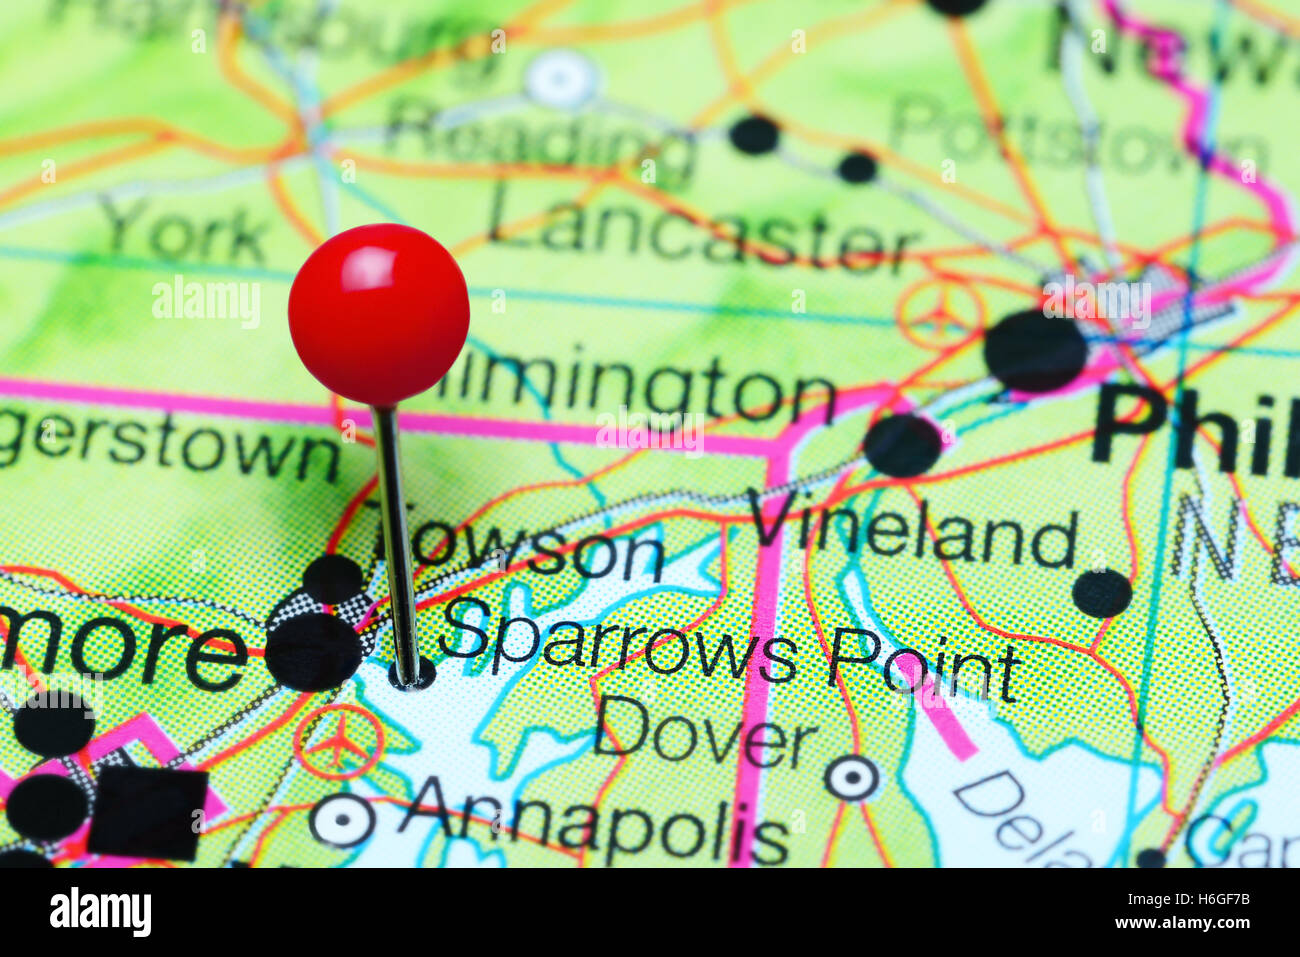 Sparrows Point pinned on a map of Maryland, USA Stock Photo - Alamy